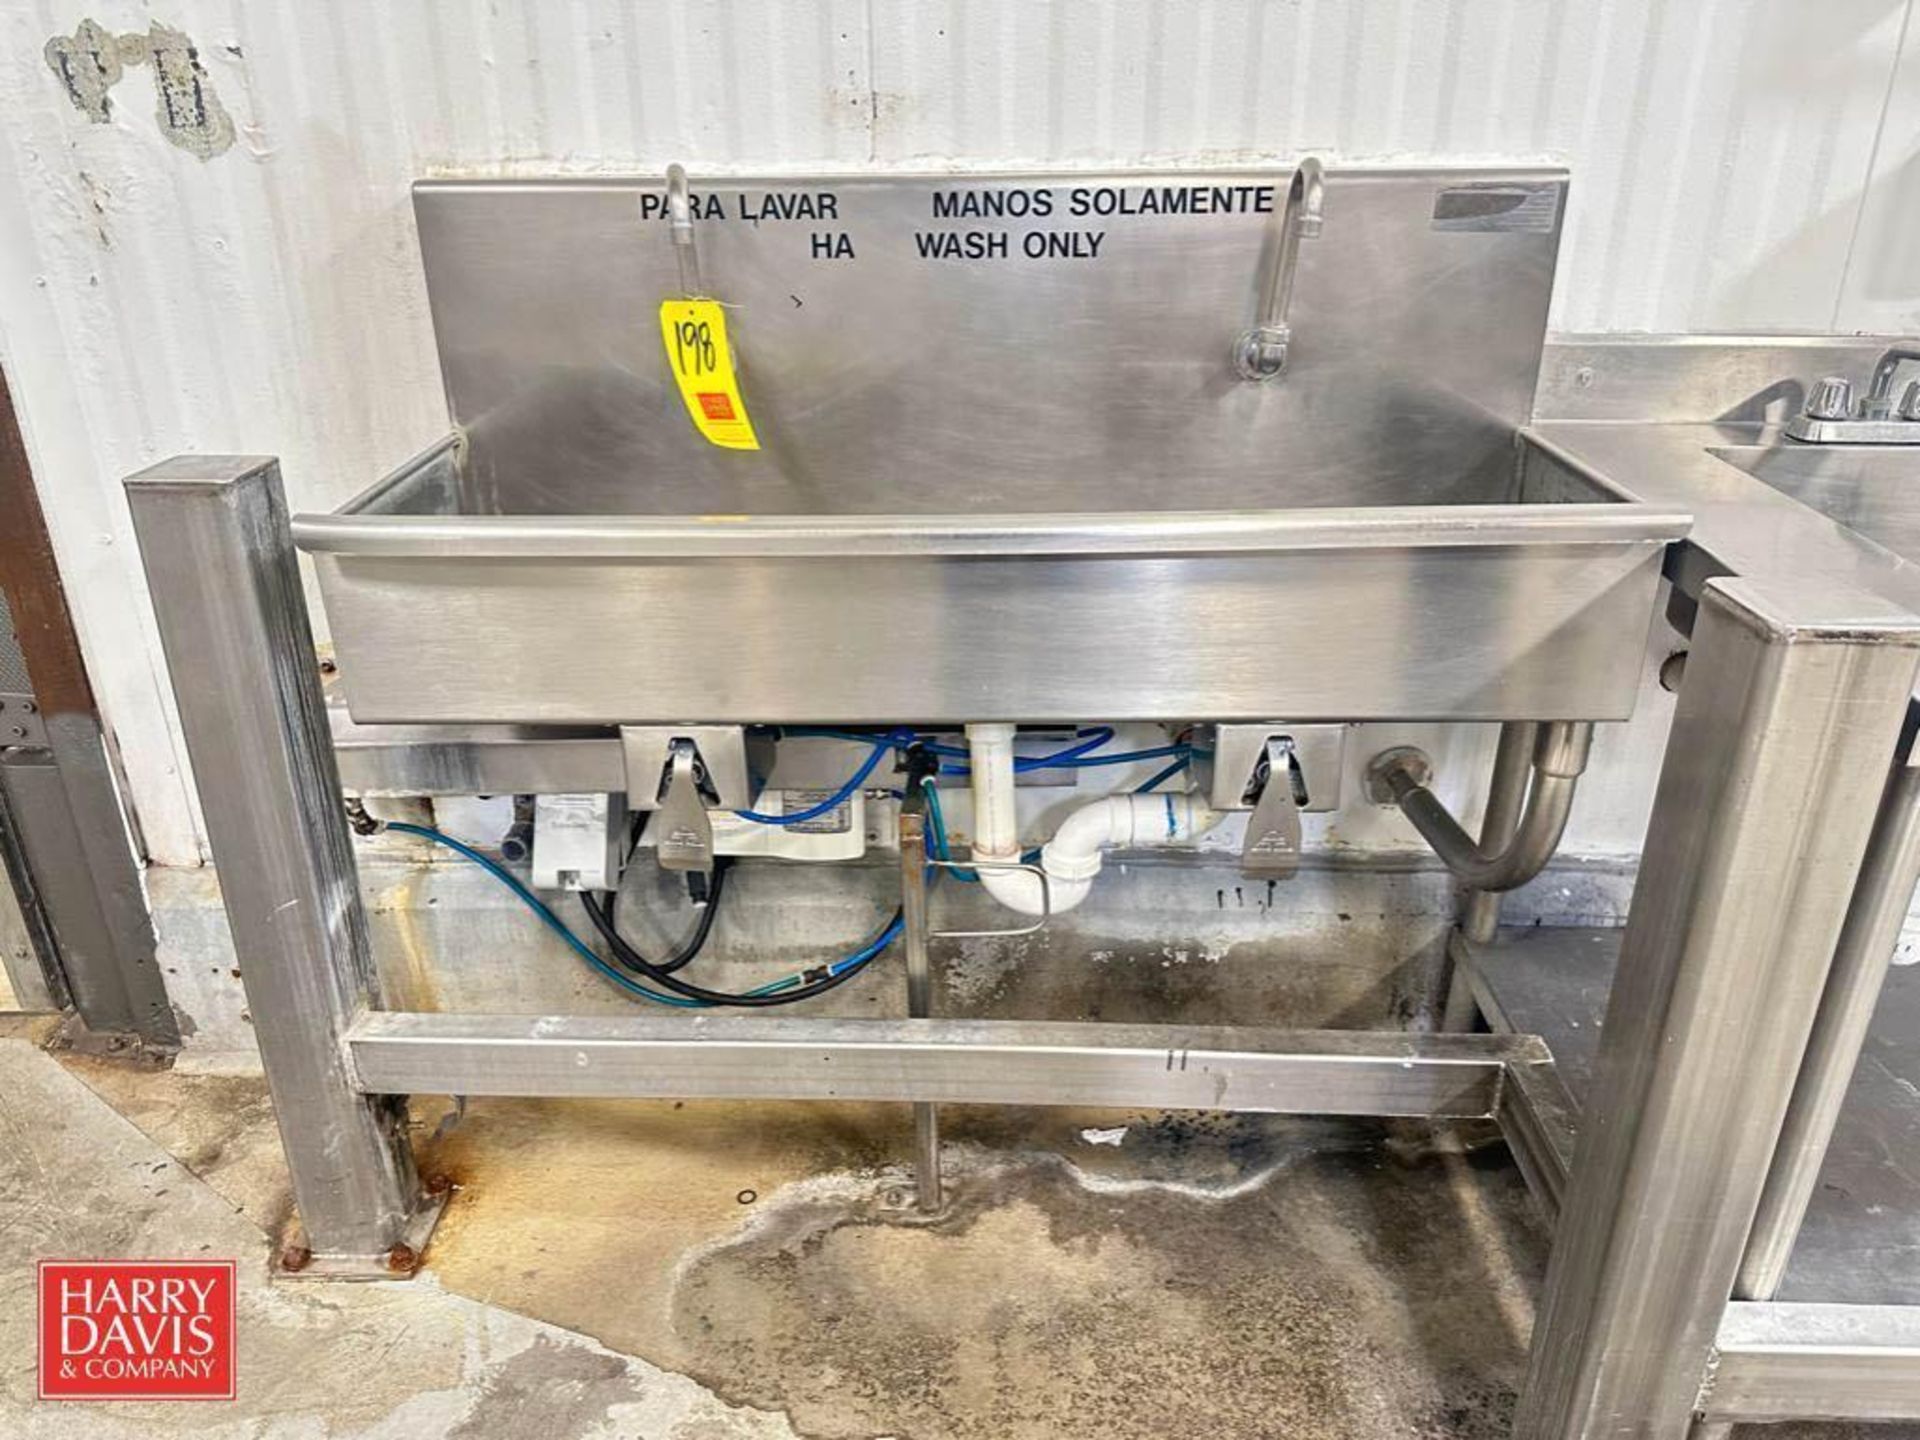 2-Station S/S Hand Sink Trough with Knee Controls - Rigging Fee: $150 - Image 2 of 2